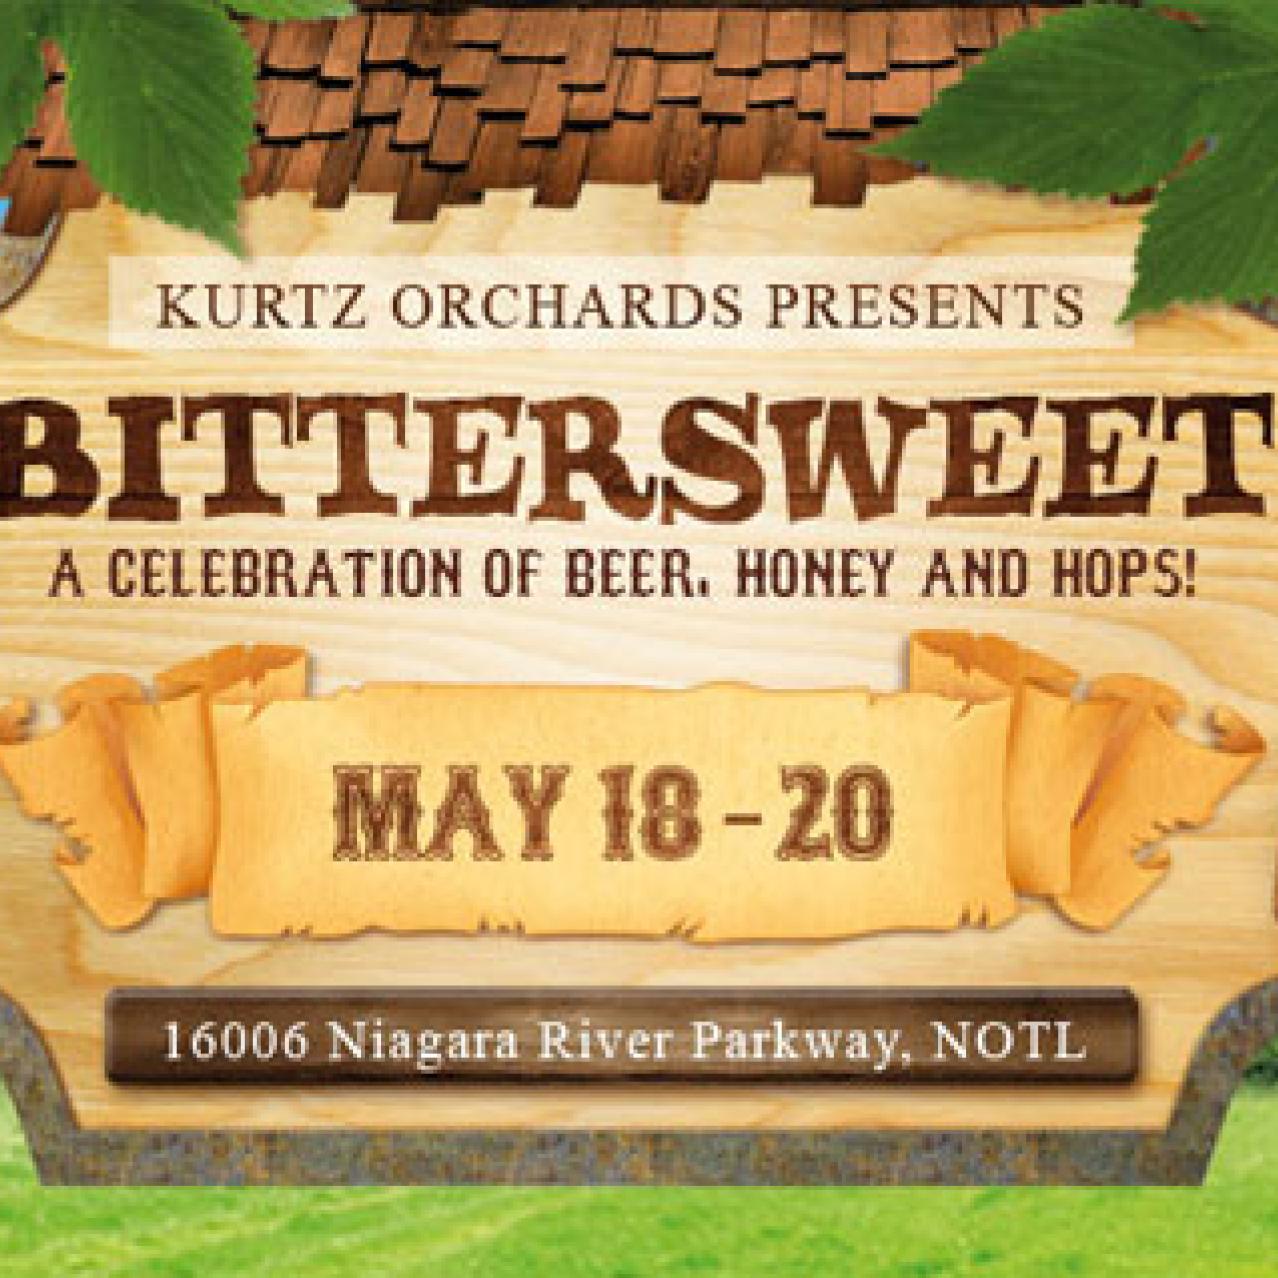 Bittersweet: A Celebration of Beer, Honey and Hops